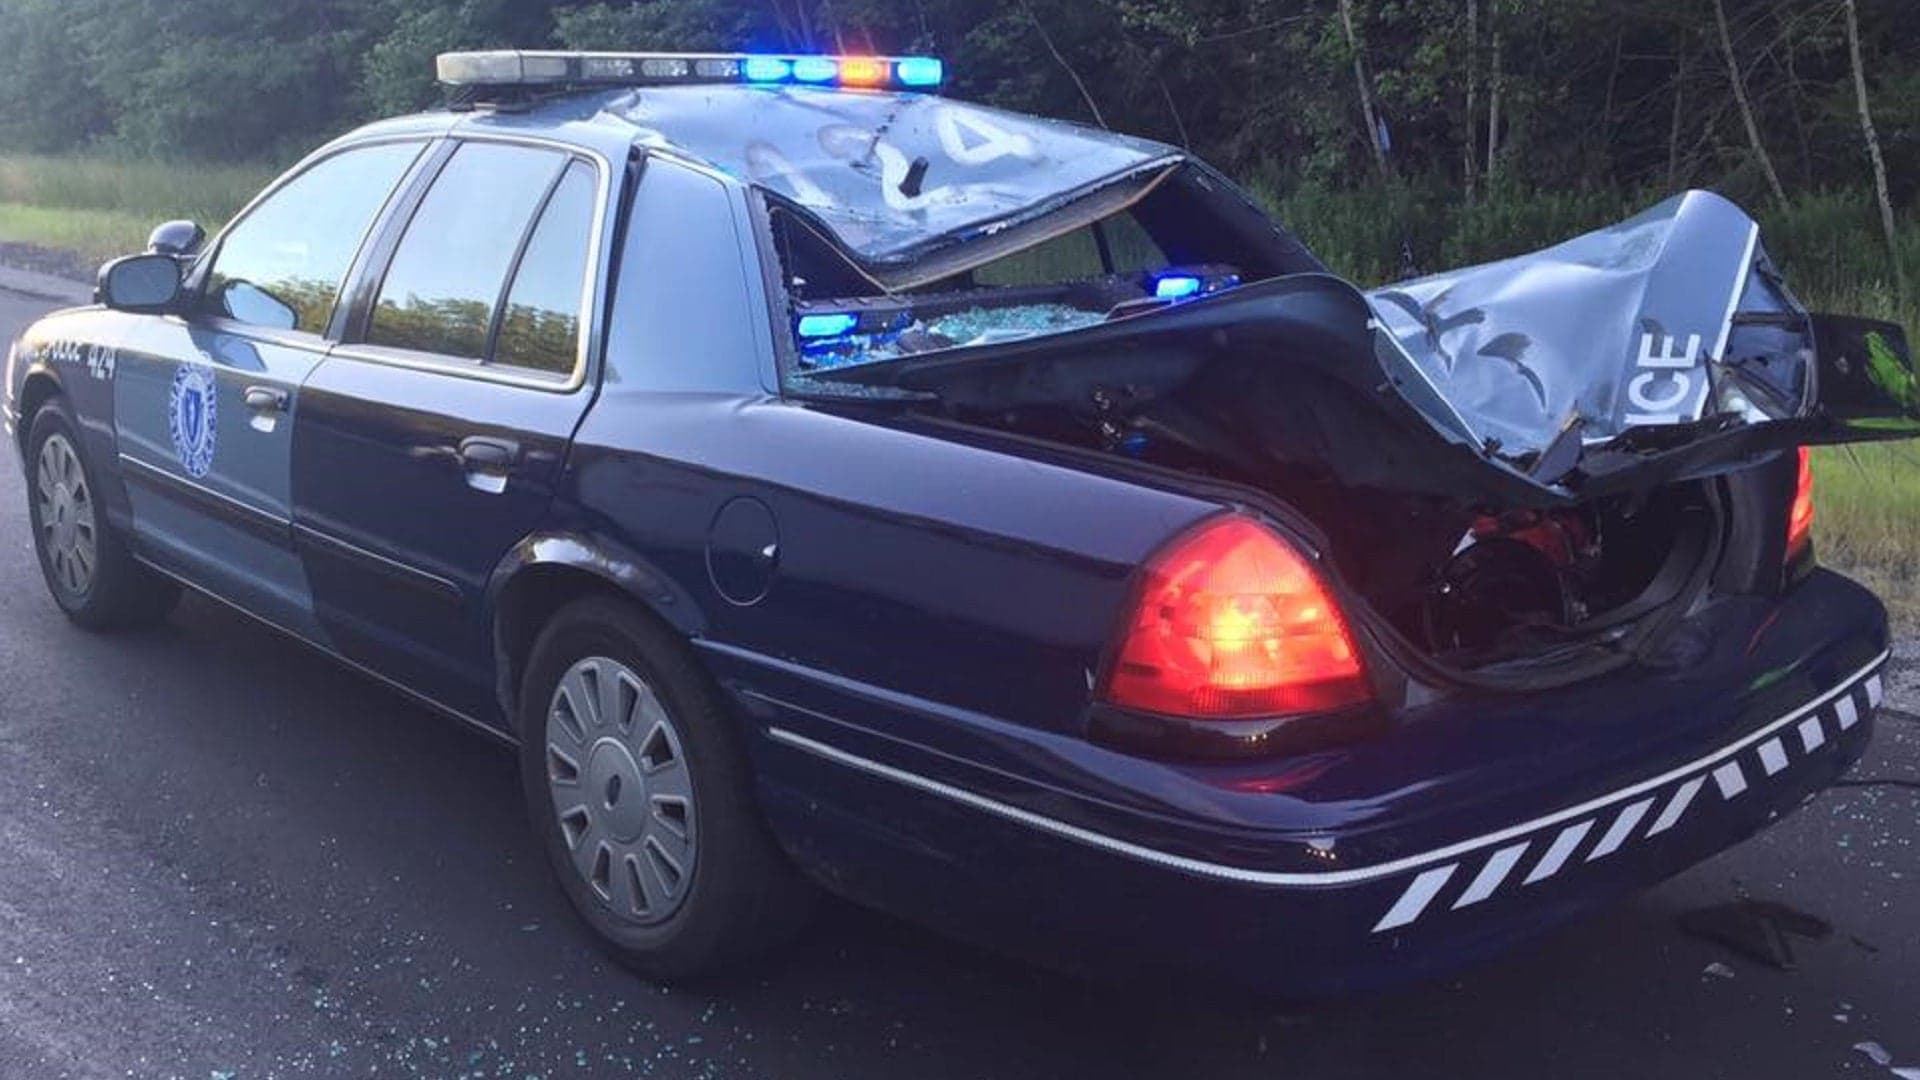 Massachusetts State Police Cruiser Smashed By Detached Truck Wheels